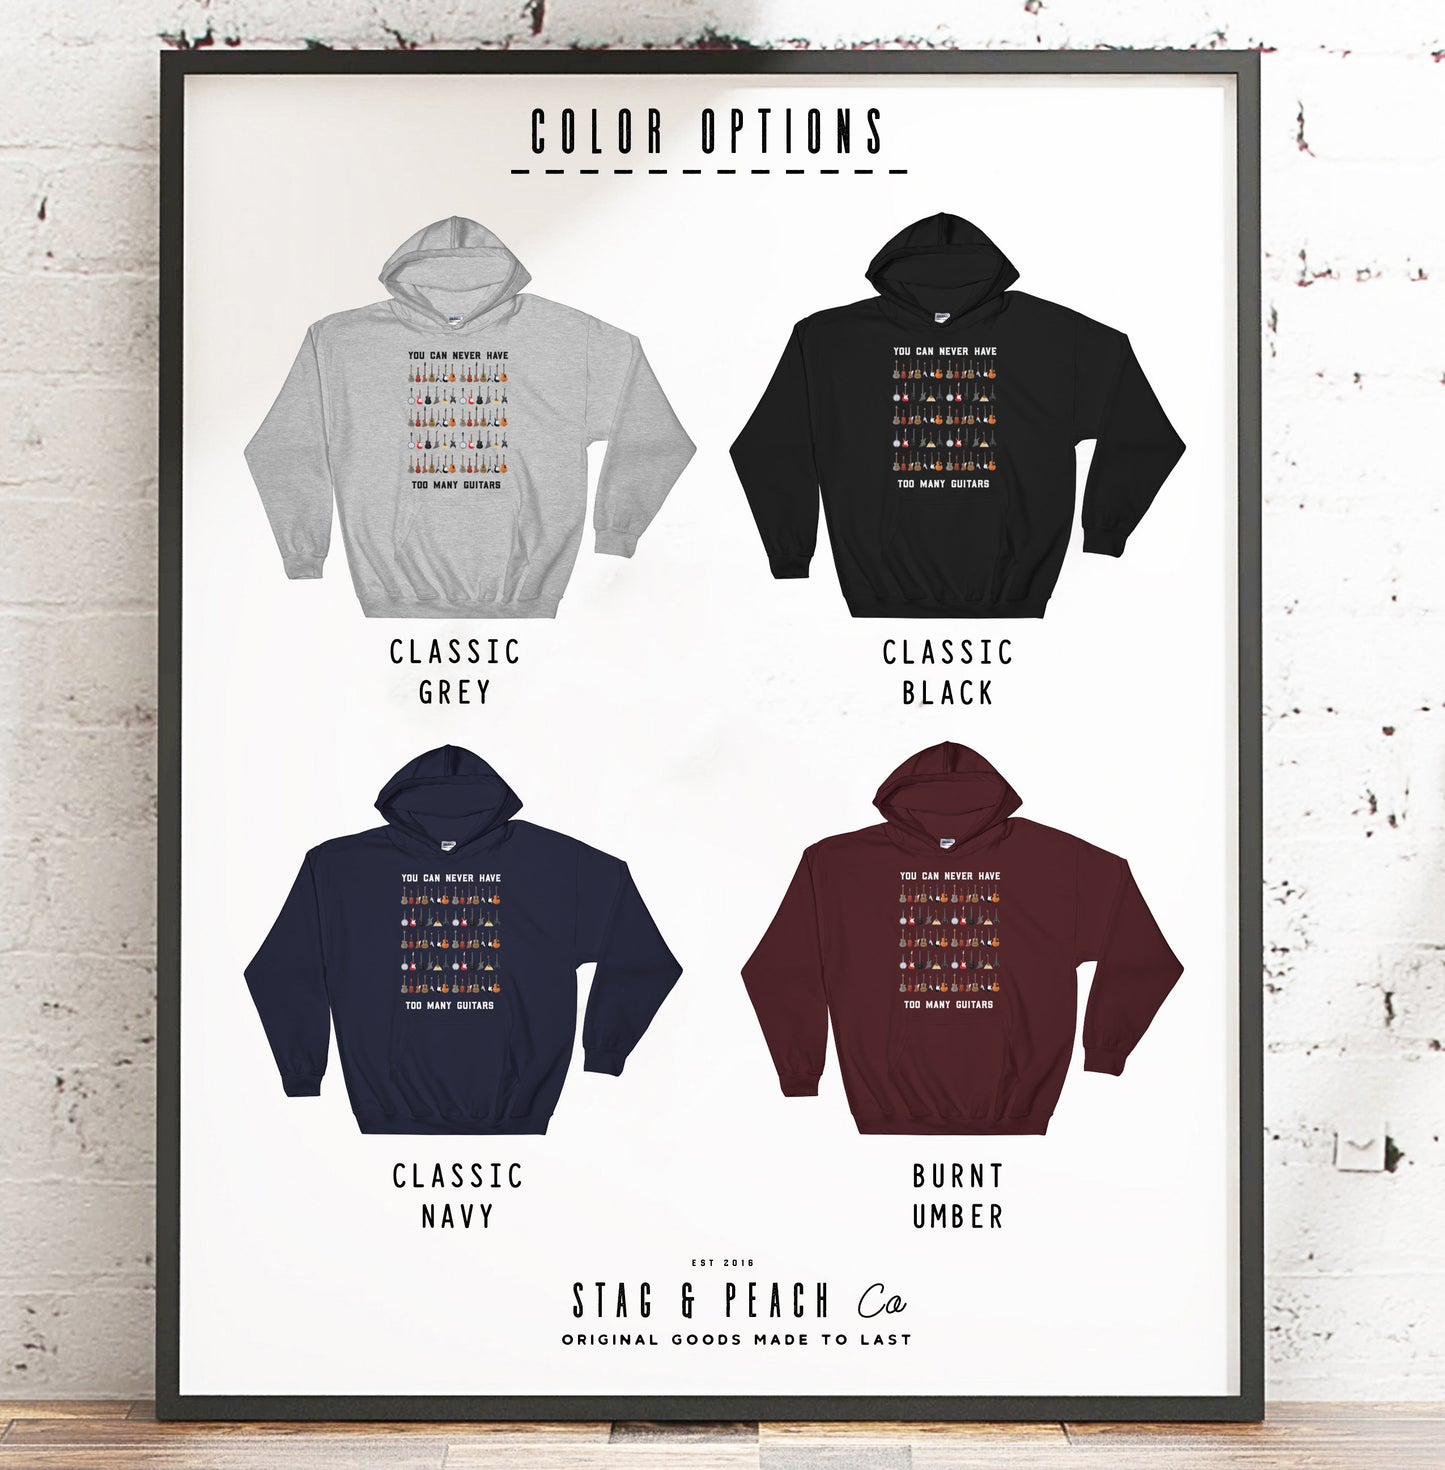 You Can Never Have Too Many Guitars Hoodie - Guitar Hoodie, Guitar Shirt, Bass Guitar shirt, Bass Guitarist, Bass Player, Funny Bass Guitar